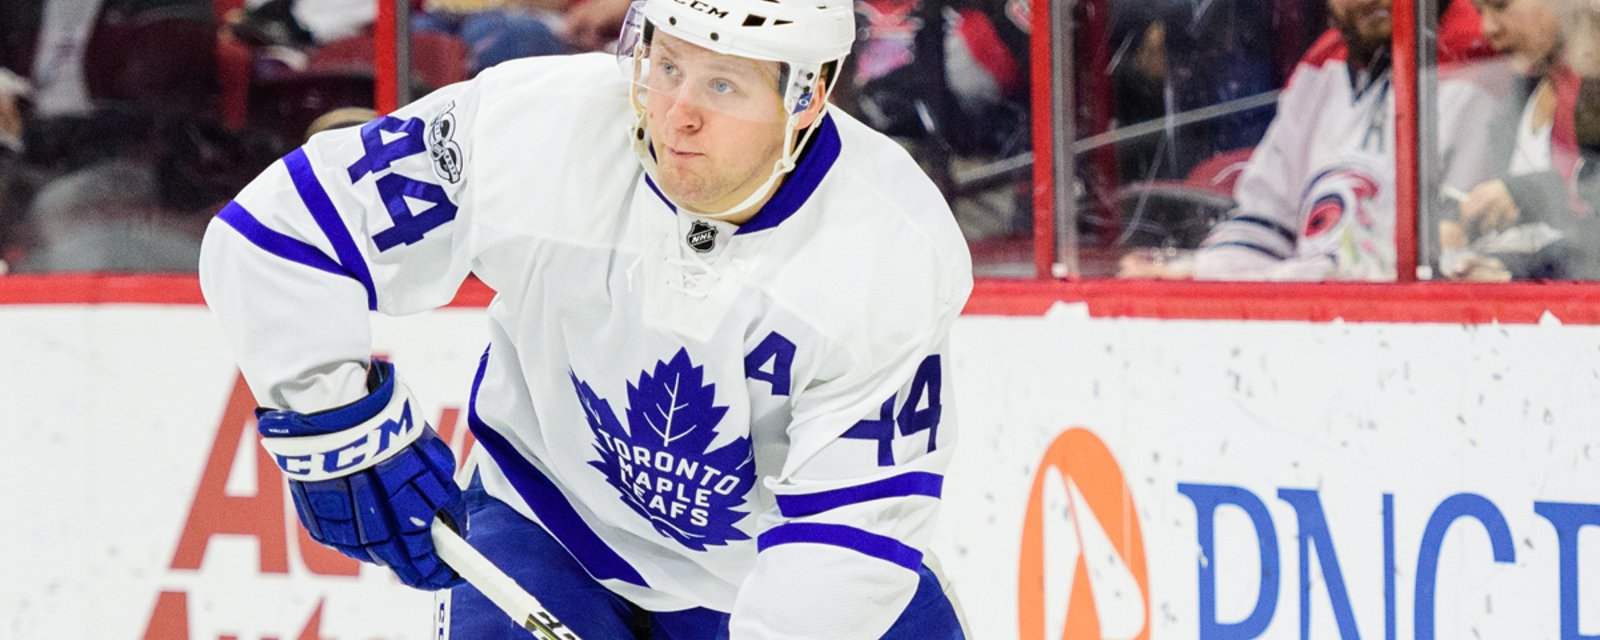 Breaking: Rielly takes a slewfoot from Voracek, rushed to the locker room